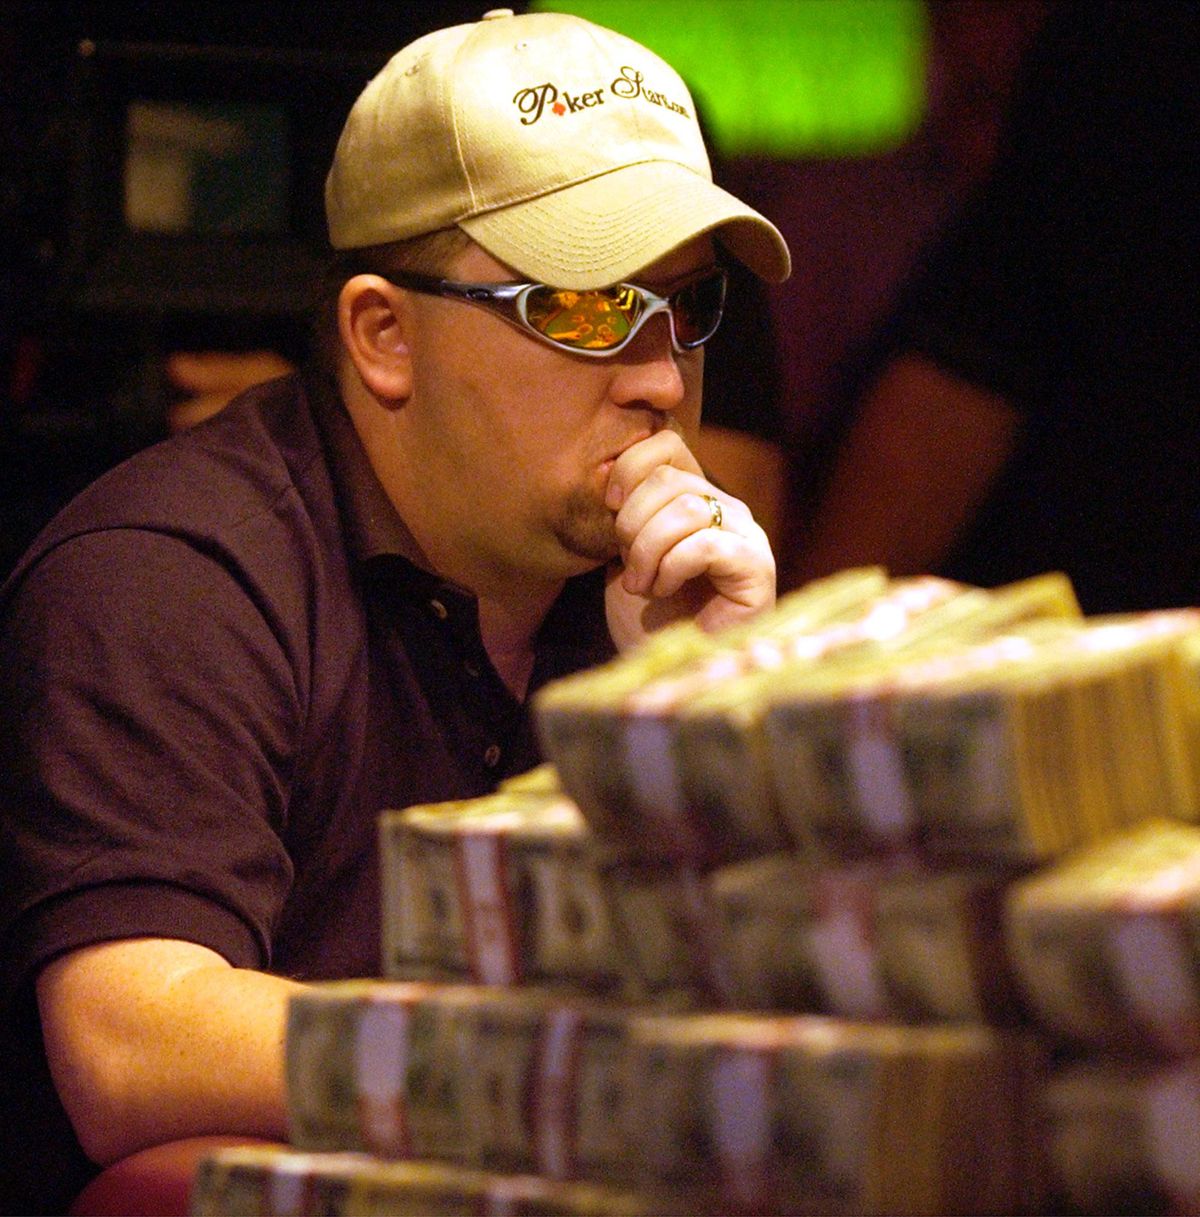 Chris Moneymaker of Spring Hill, Tennessee, plays the final hand of the World Series of Poker in 2003 at the Binion’s Horseshoe Casino in Las Vegas. Moneymaker, who won the $2.5 million tournament after qualifying in a $40 internet tournament, has legislators taking a second look at possible regulation of internet gambling. (JOE CAVARETTA / ASSOCIATED PRESS)